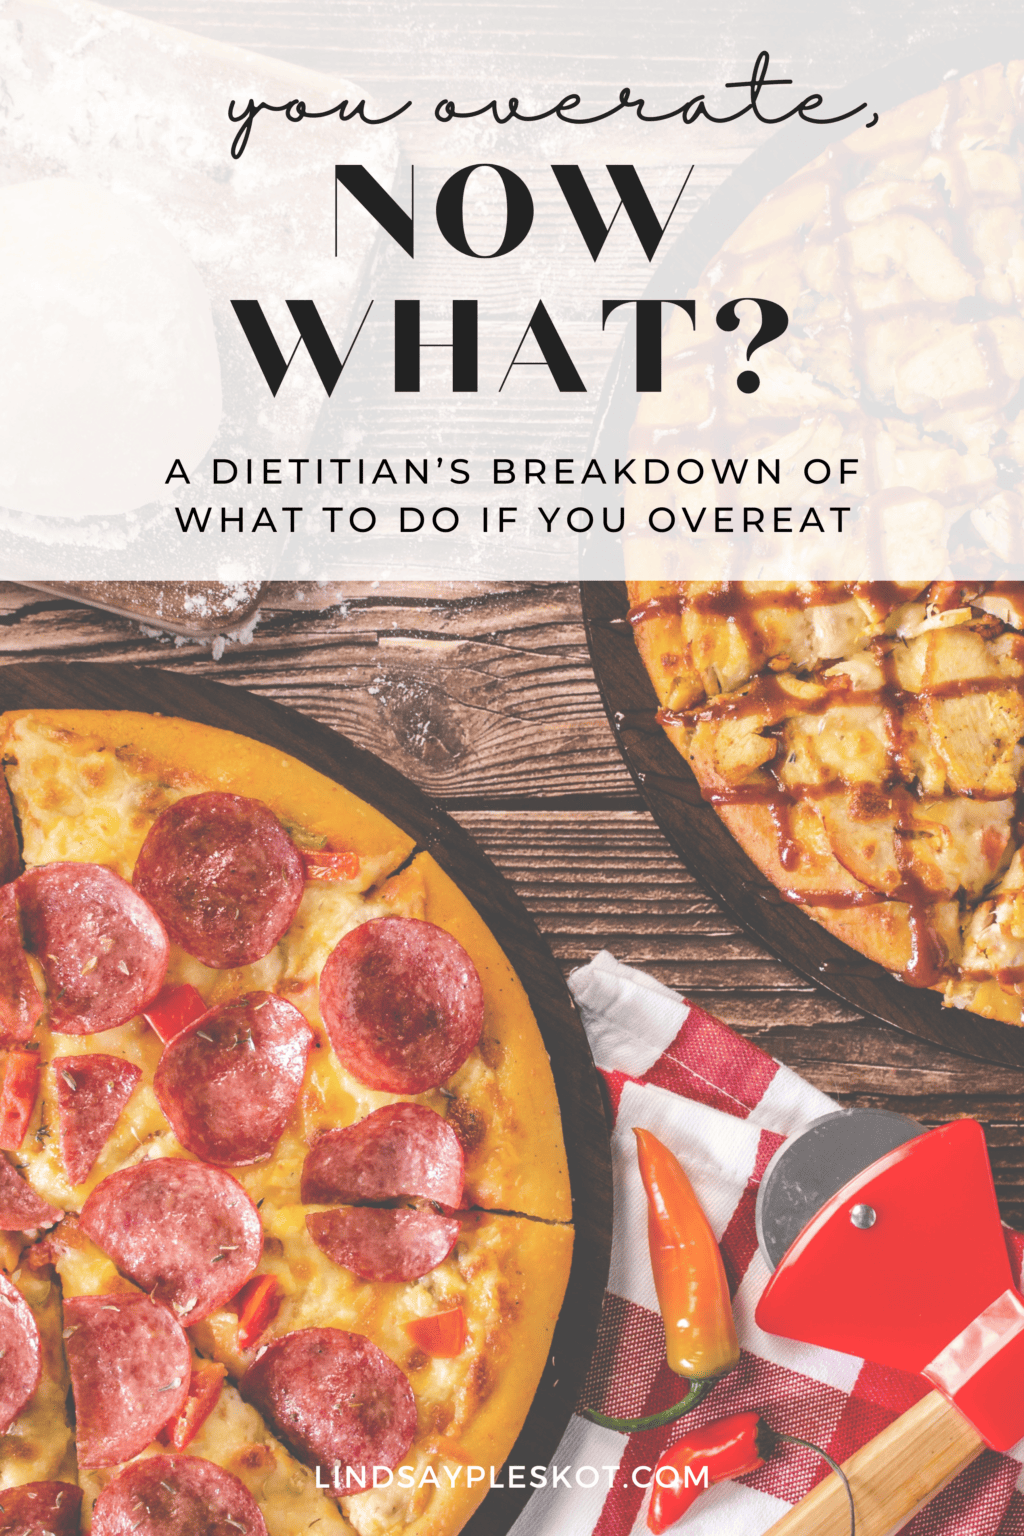 An image of two pizzas on trays with the heading "you overeat, now what? A dietitian's breakdown of what to do if you overeat".